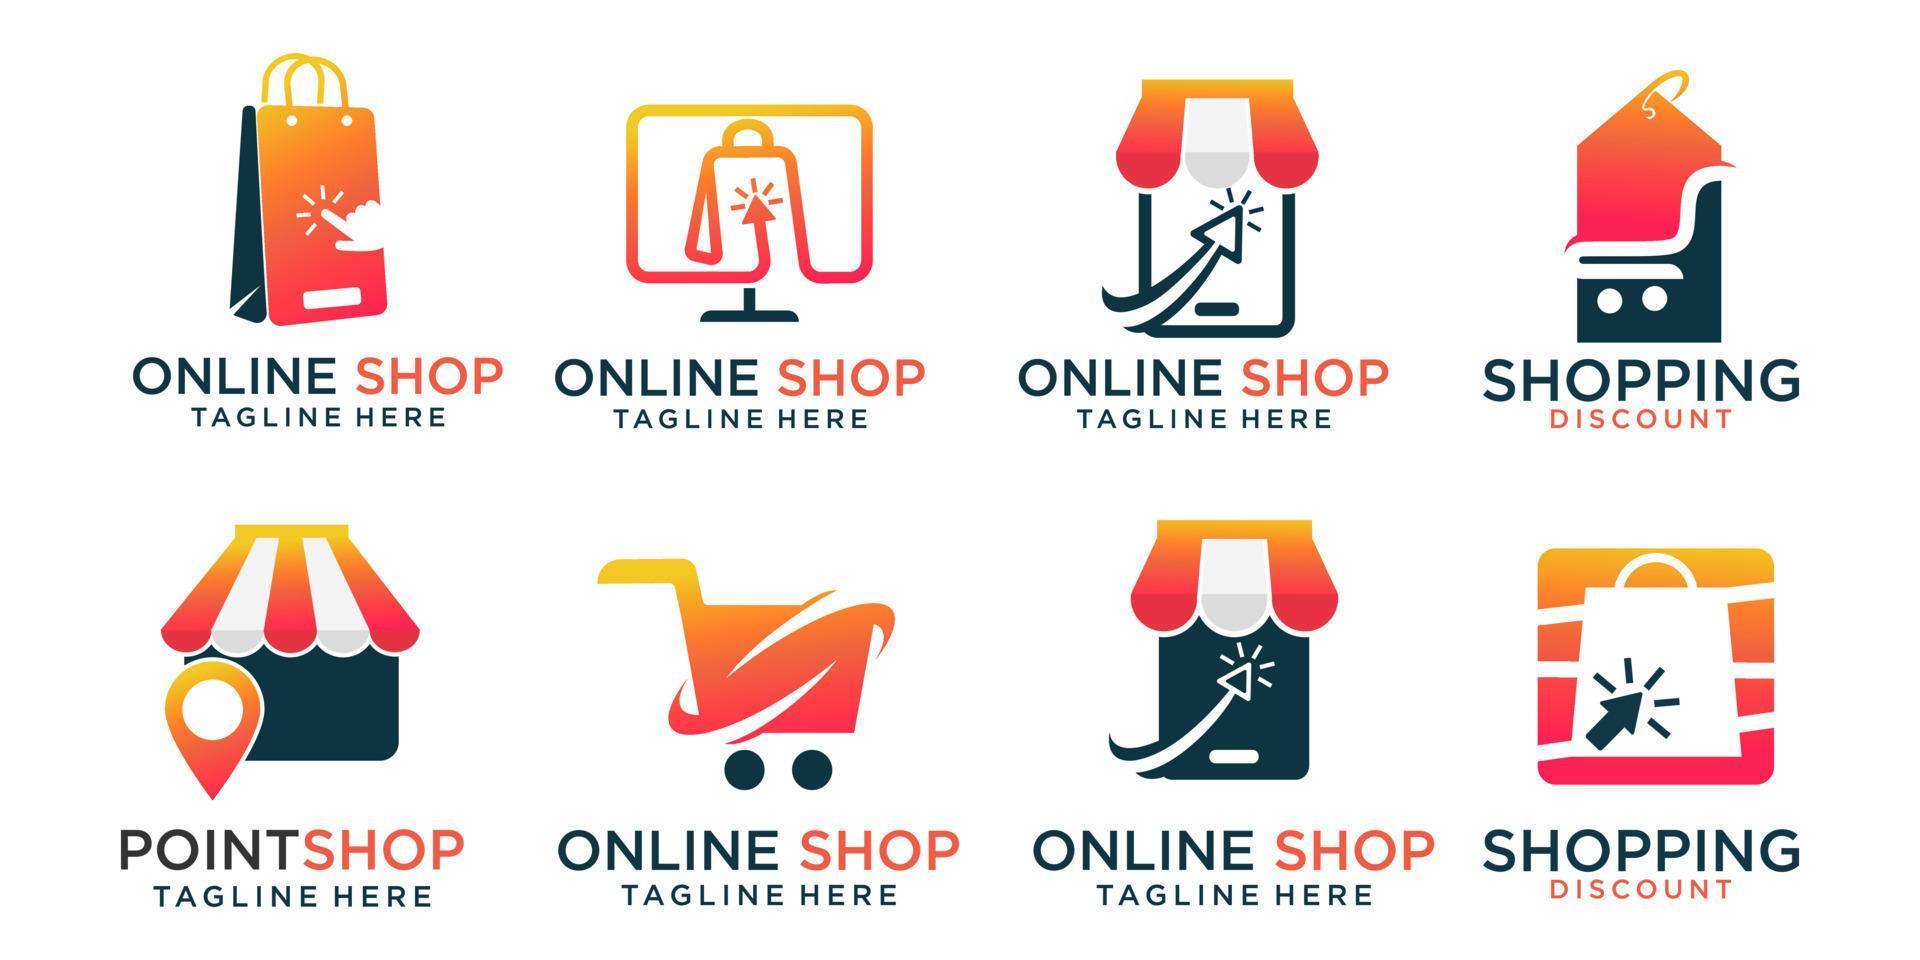 Online Shop icon set Logo designs .Combination ,shop,shopping bag,trolley, phone,computer and map vector